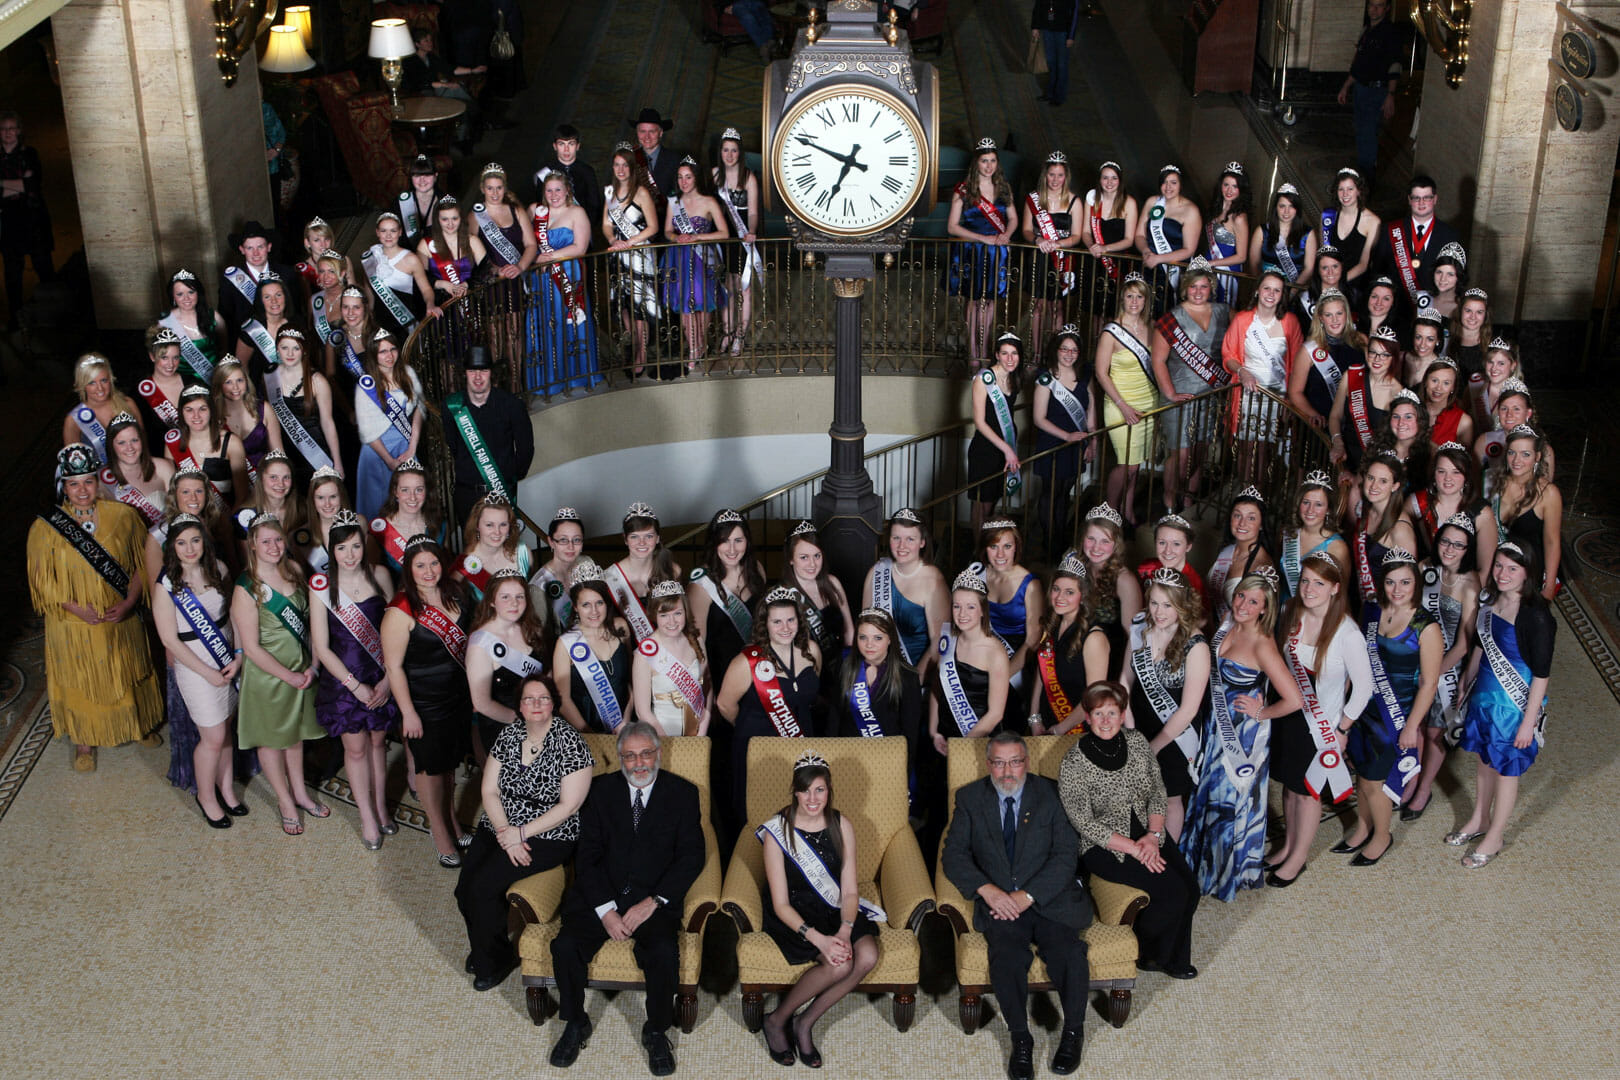 2012 Ambassadors of the Ontario Association of Agricultural Societies at the Royal York Hotel